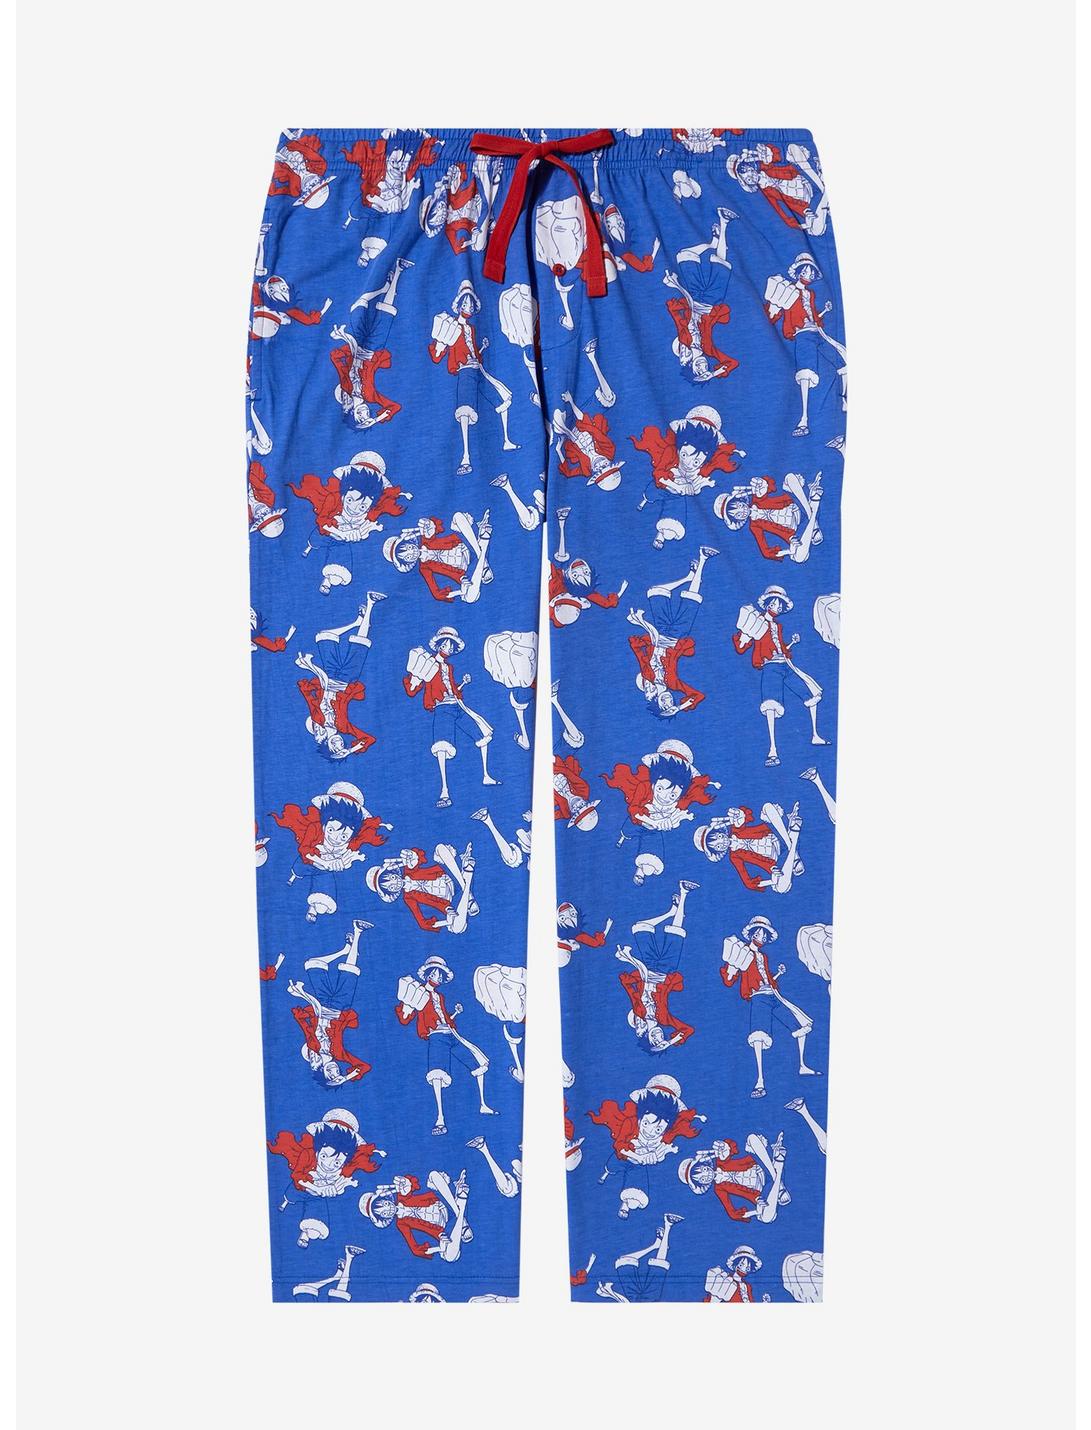 One Piece Monkey D. Luffy Poses Plus Size Sleep Pants - BoxLunch Exclusive, BLUE, hi-res